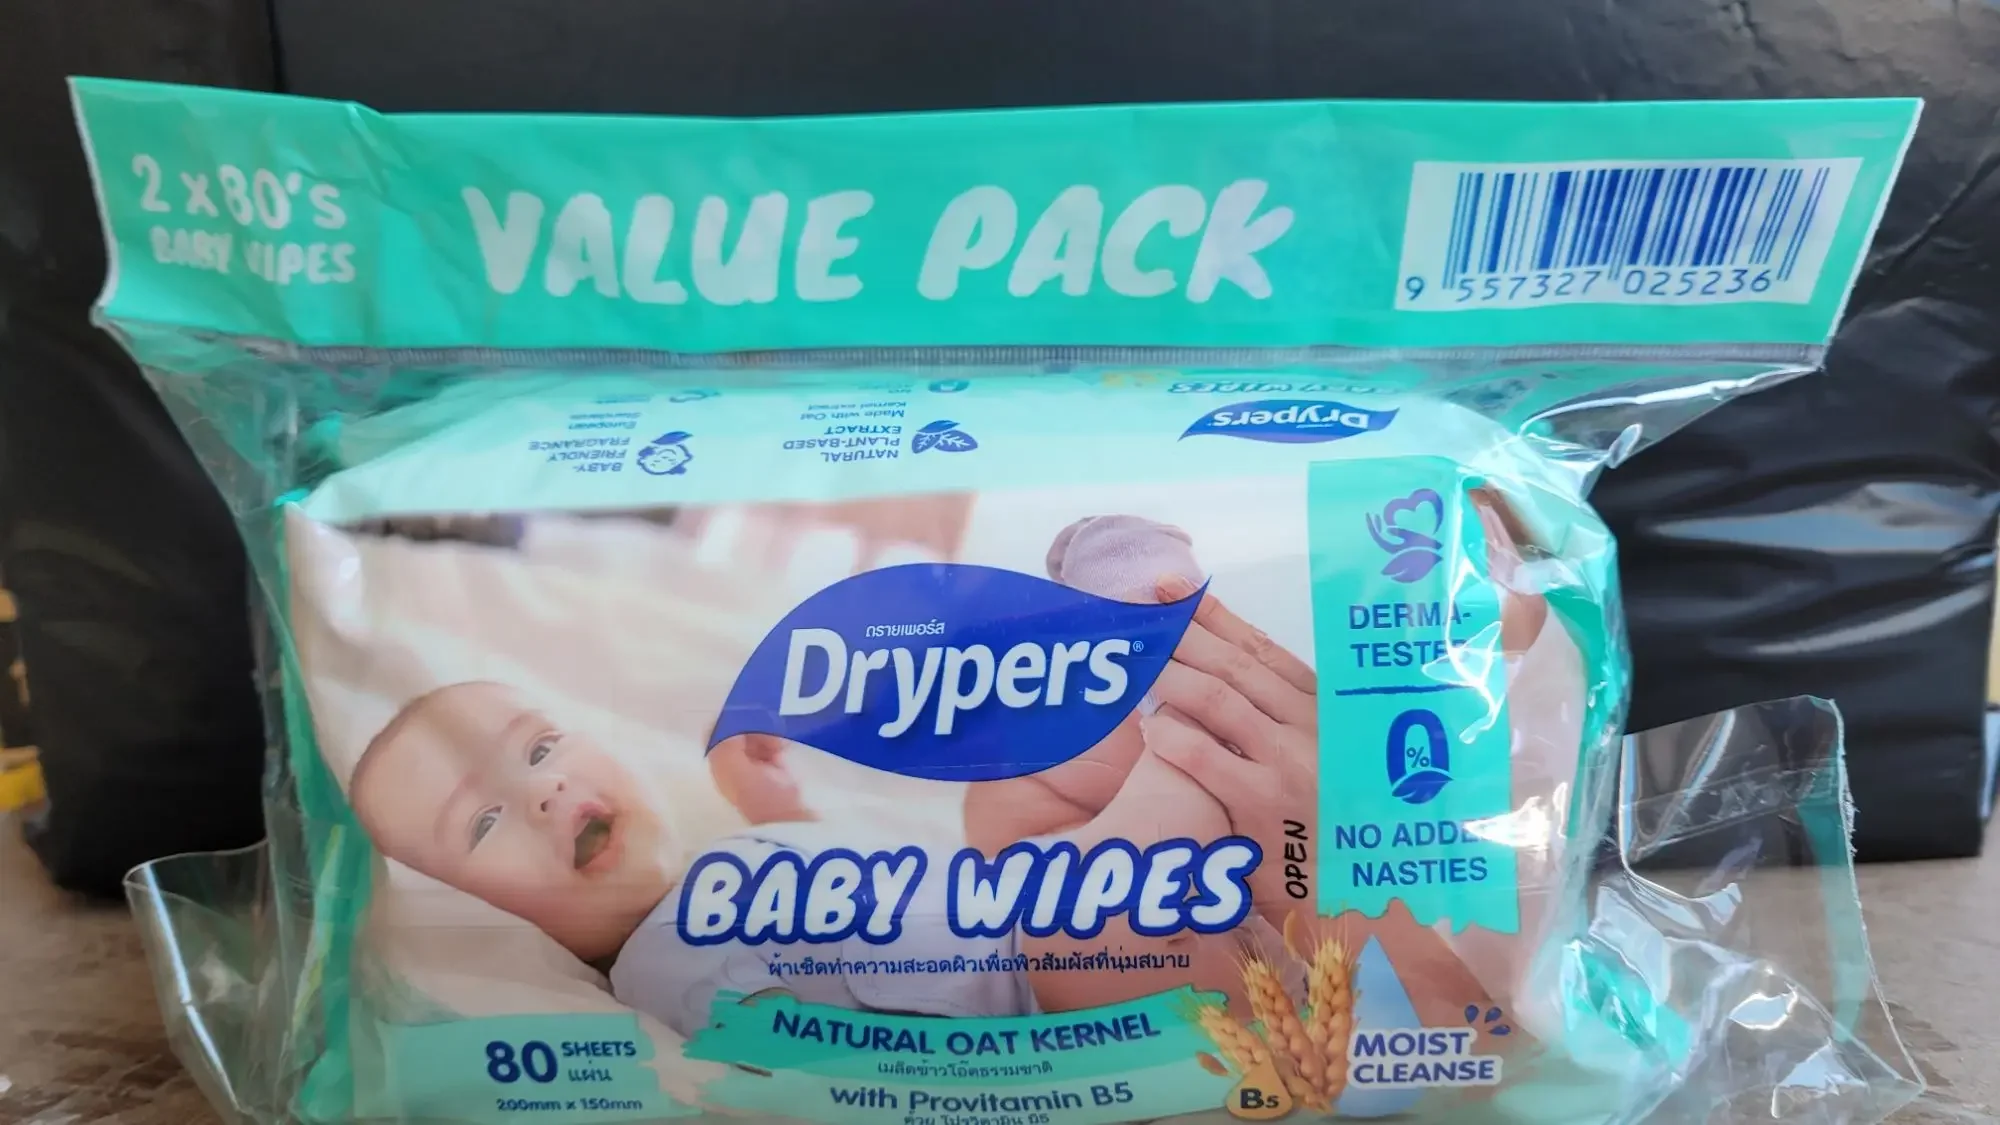 Drypers Baby Wipes Natural Oat Kernel With Provitamin B5 Value Pack (2x80sheets)